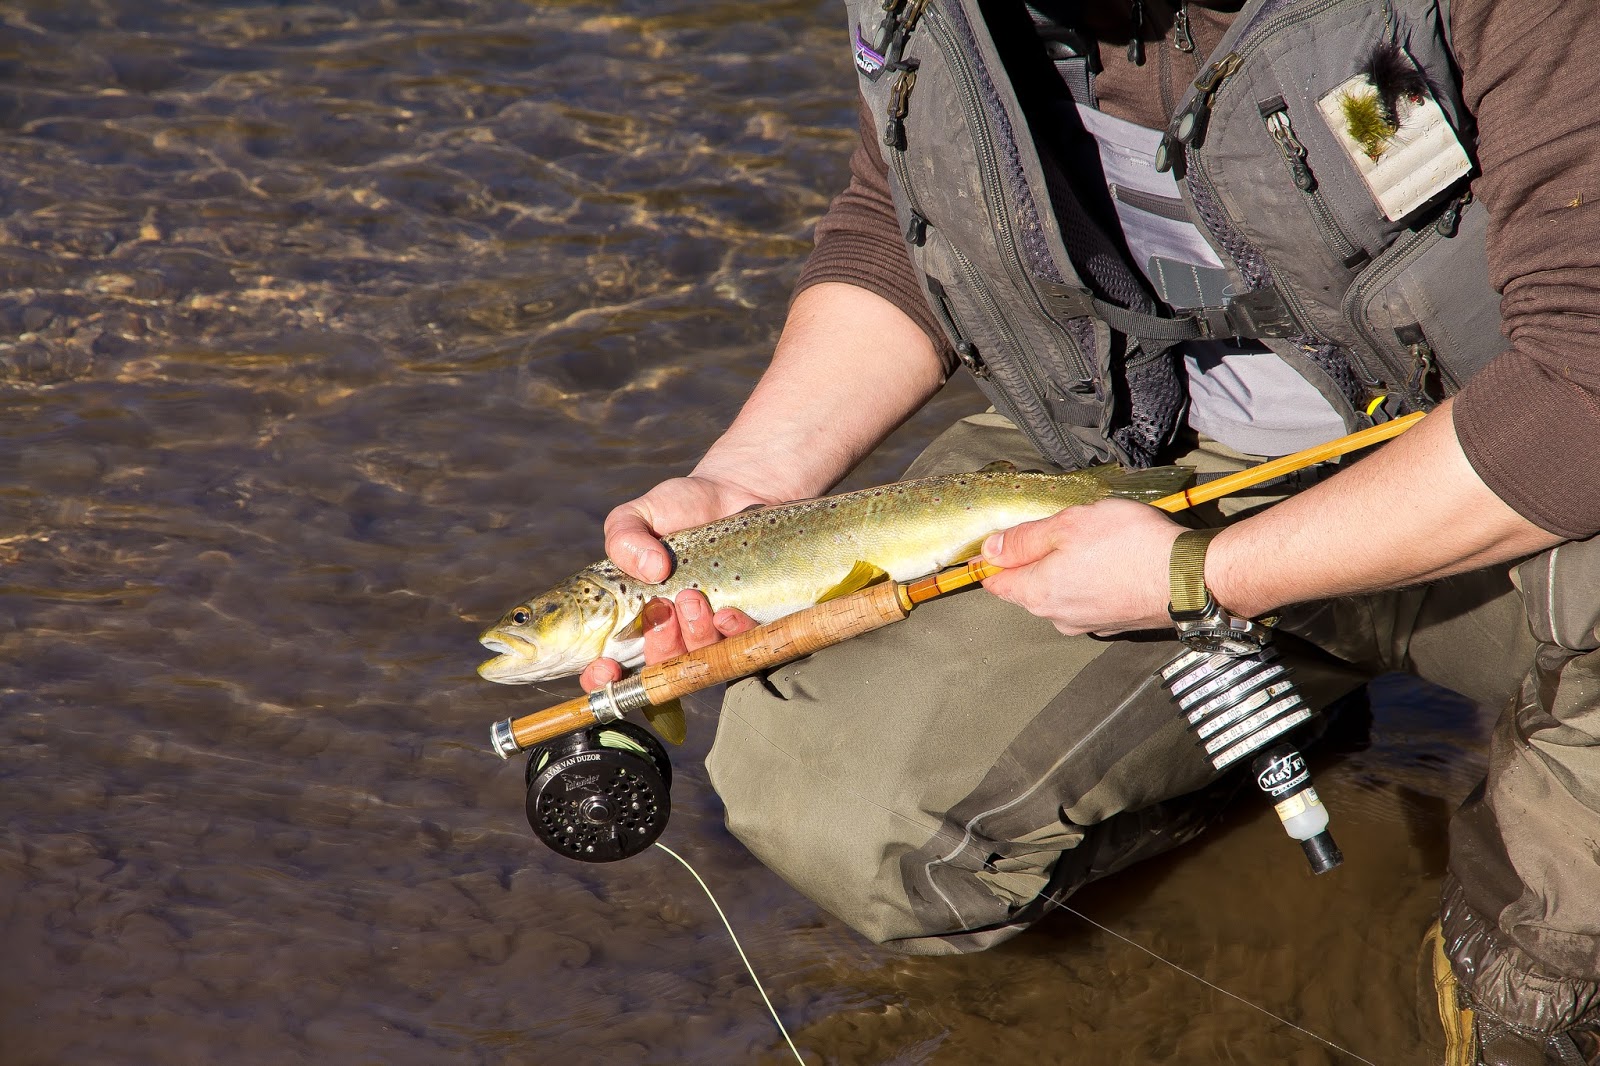 Speckled trout fishing is best with a fly rod, just ask Thoreau